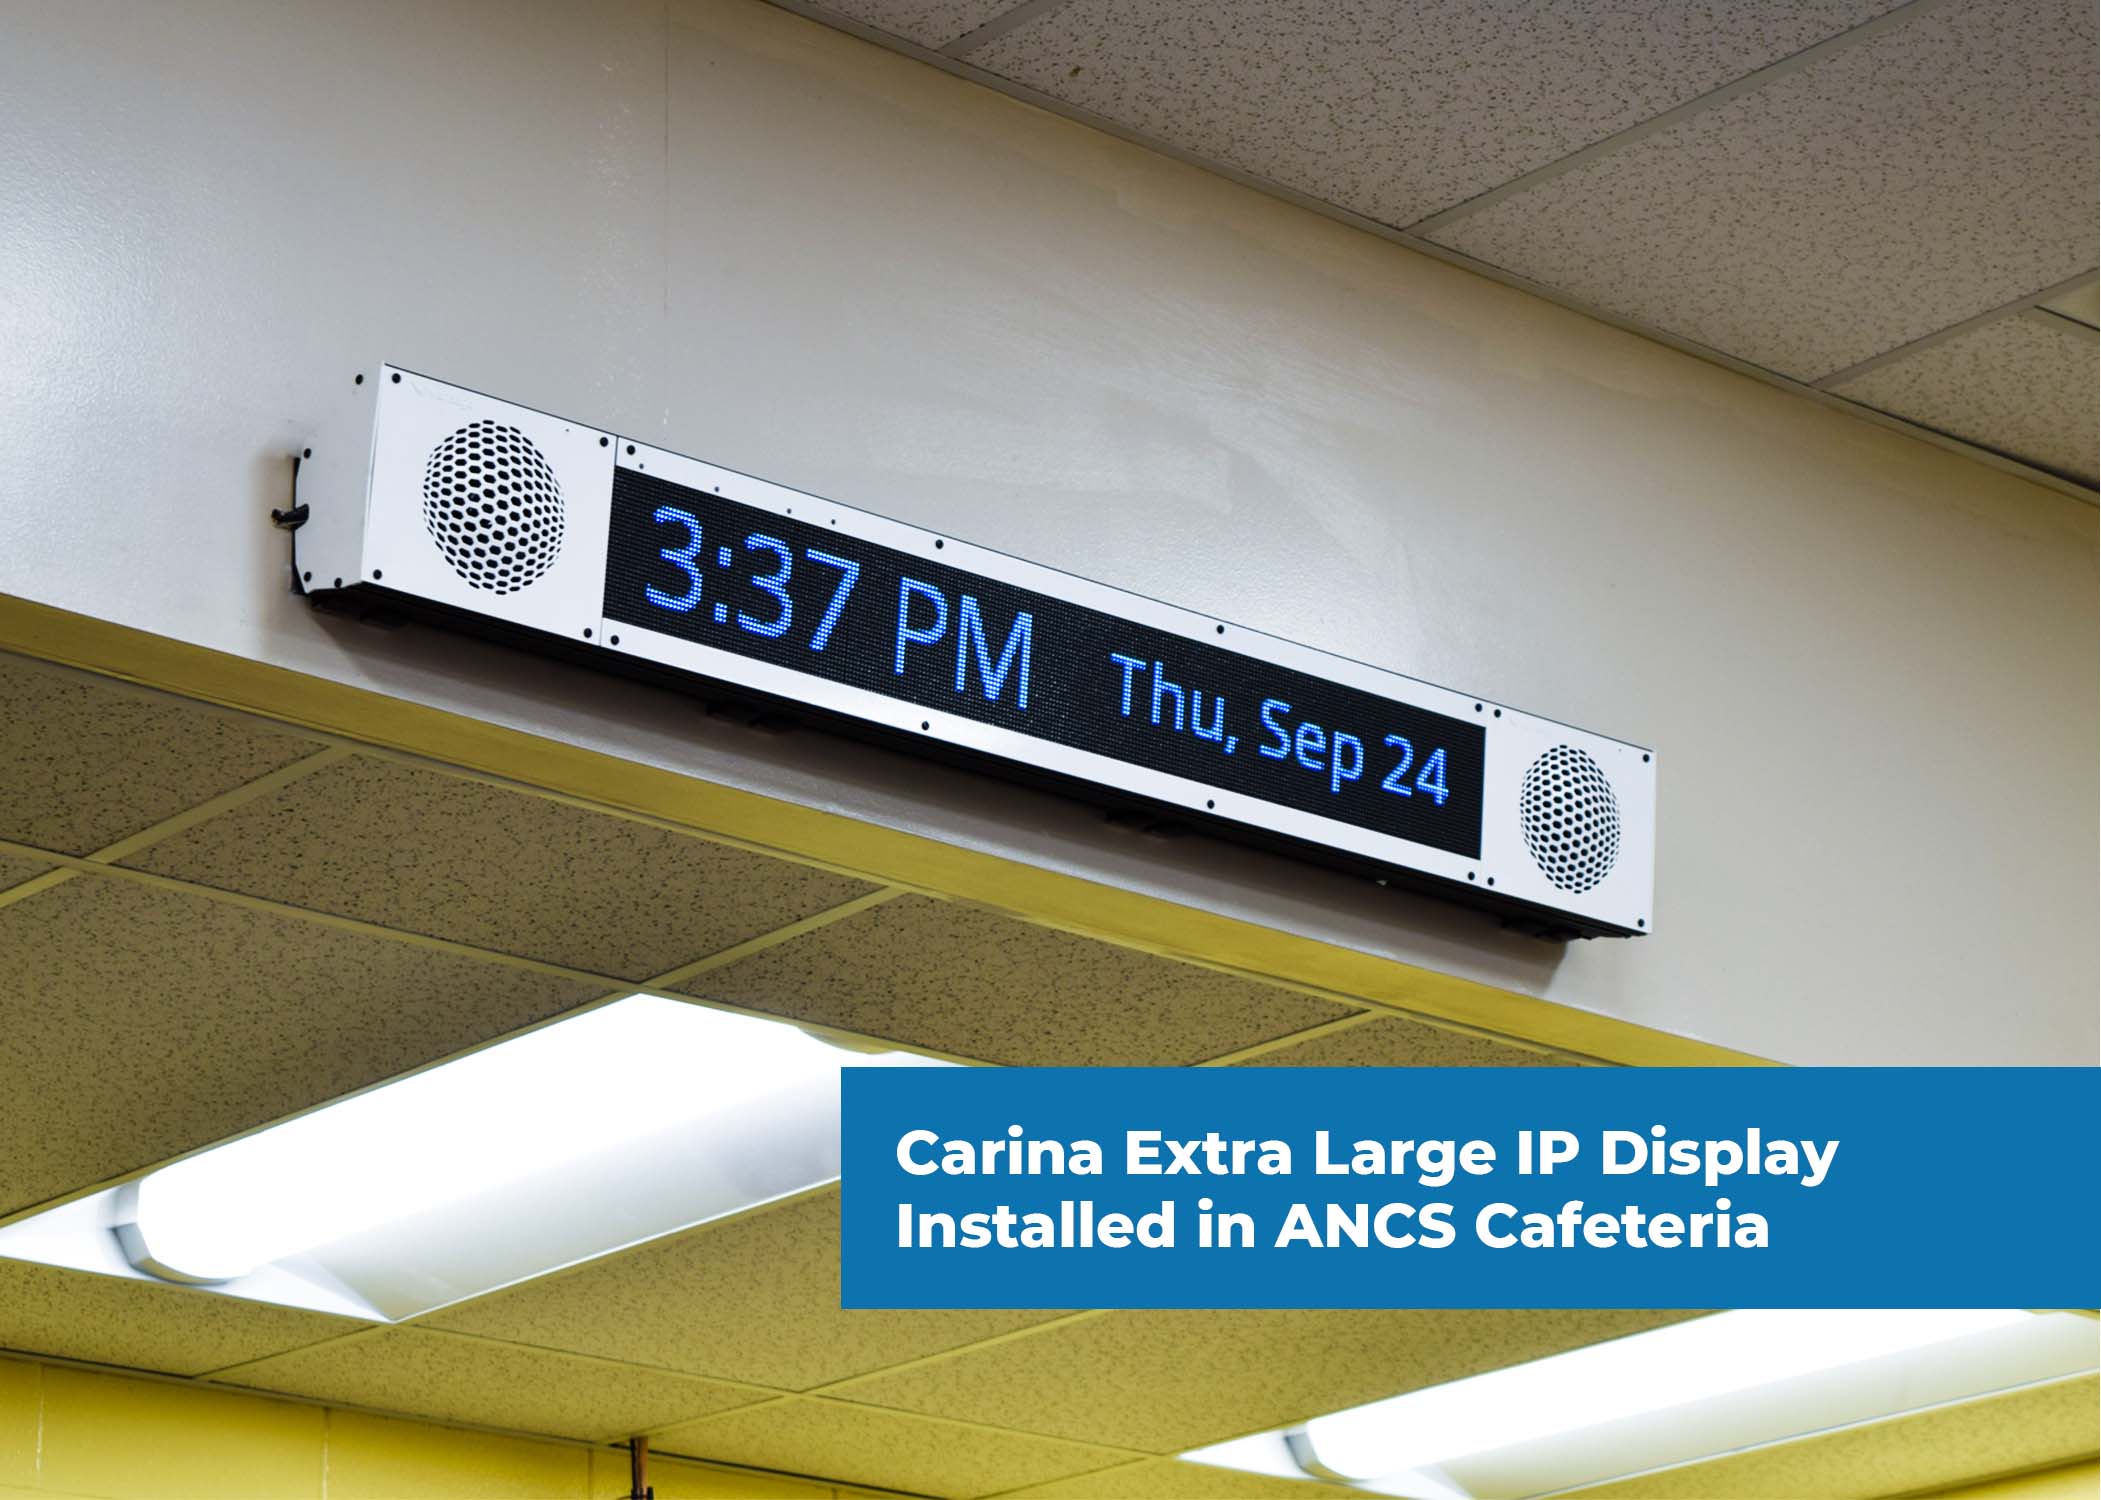 carina extra large ip display installed in ancs cafeteria